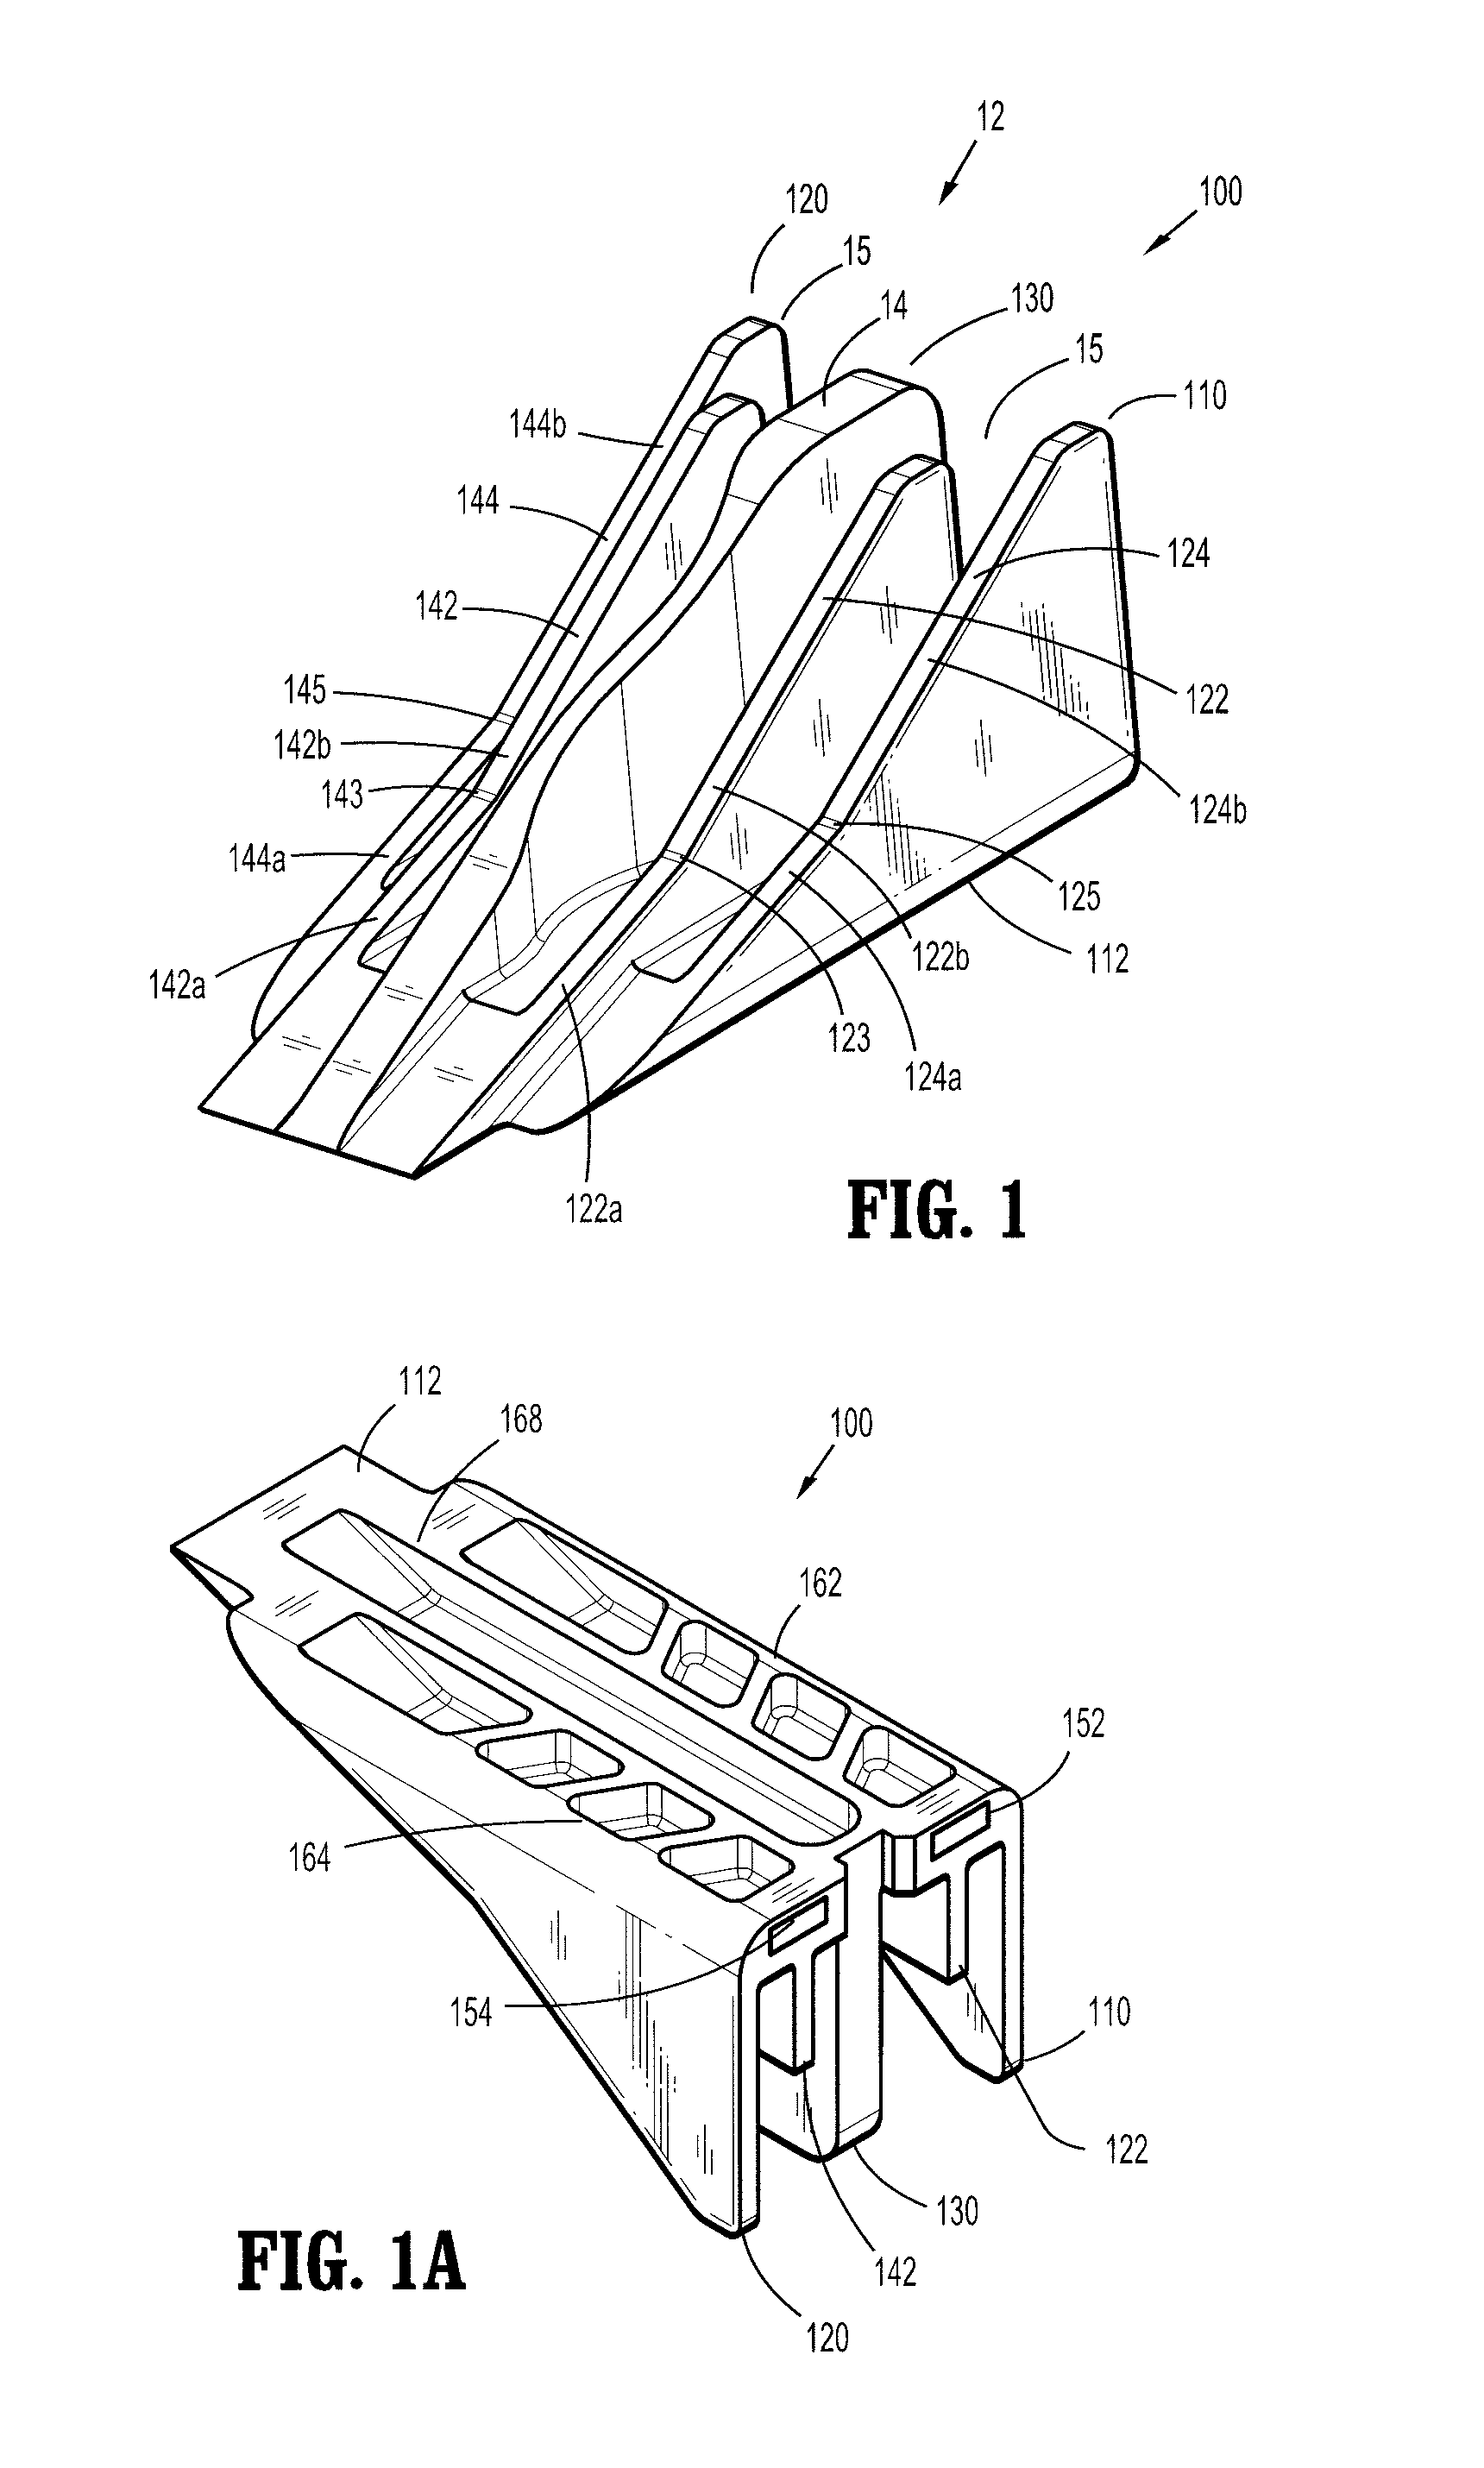 Actuation sled having a curved guide member and method